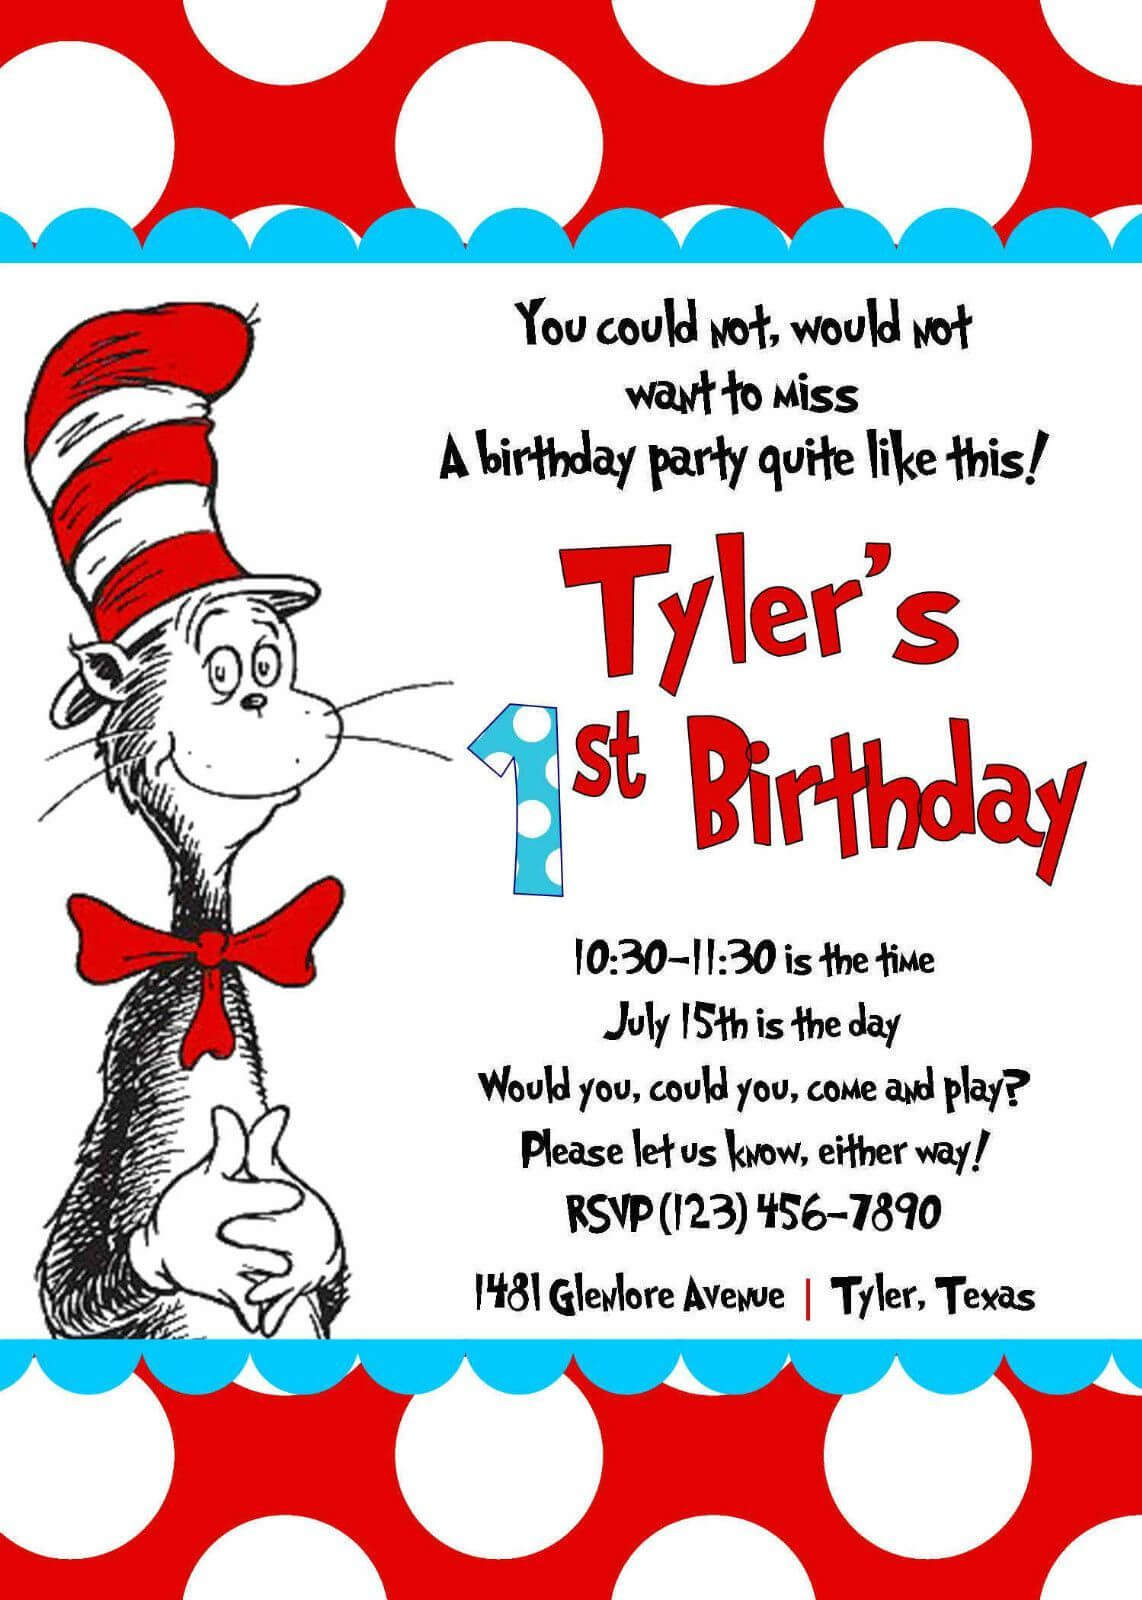 Details About Cat In The Hat Invitations, Kids Birthday Throughout Dr Seuss Birthday Card Template